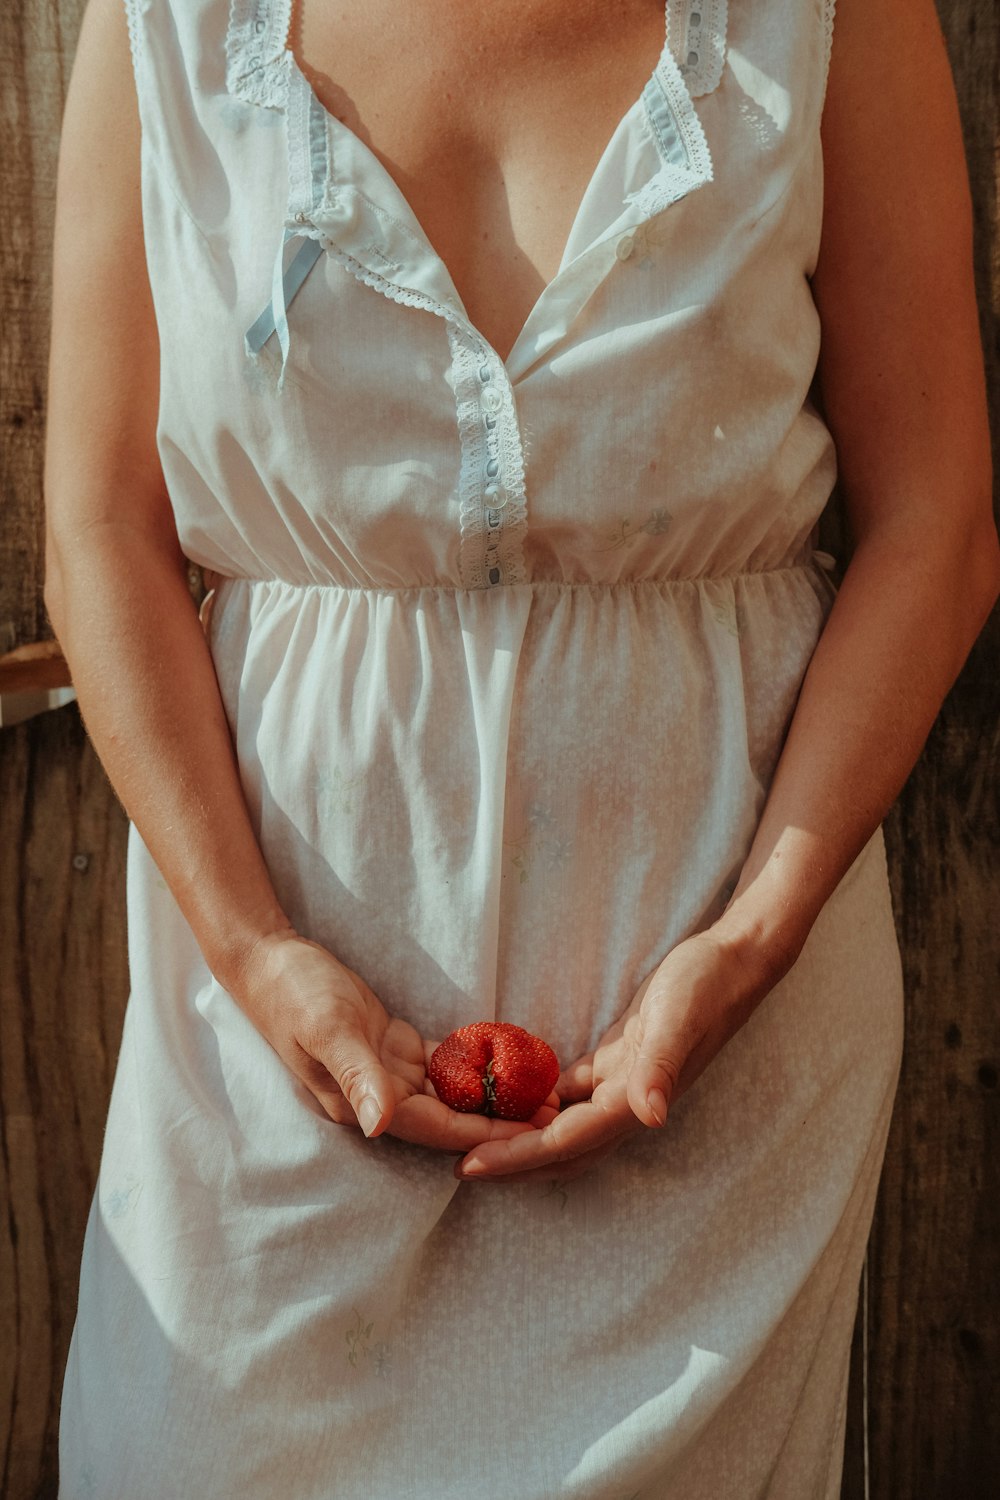 unknown person holding red fruit